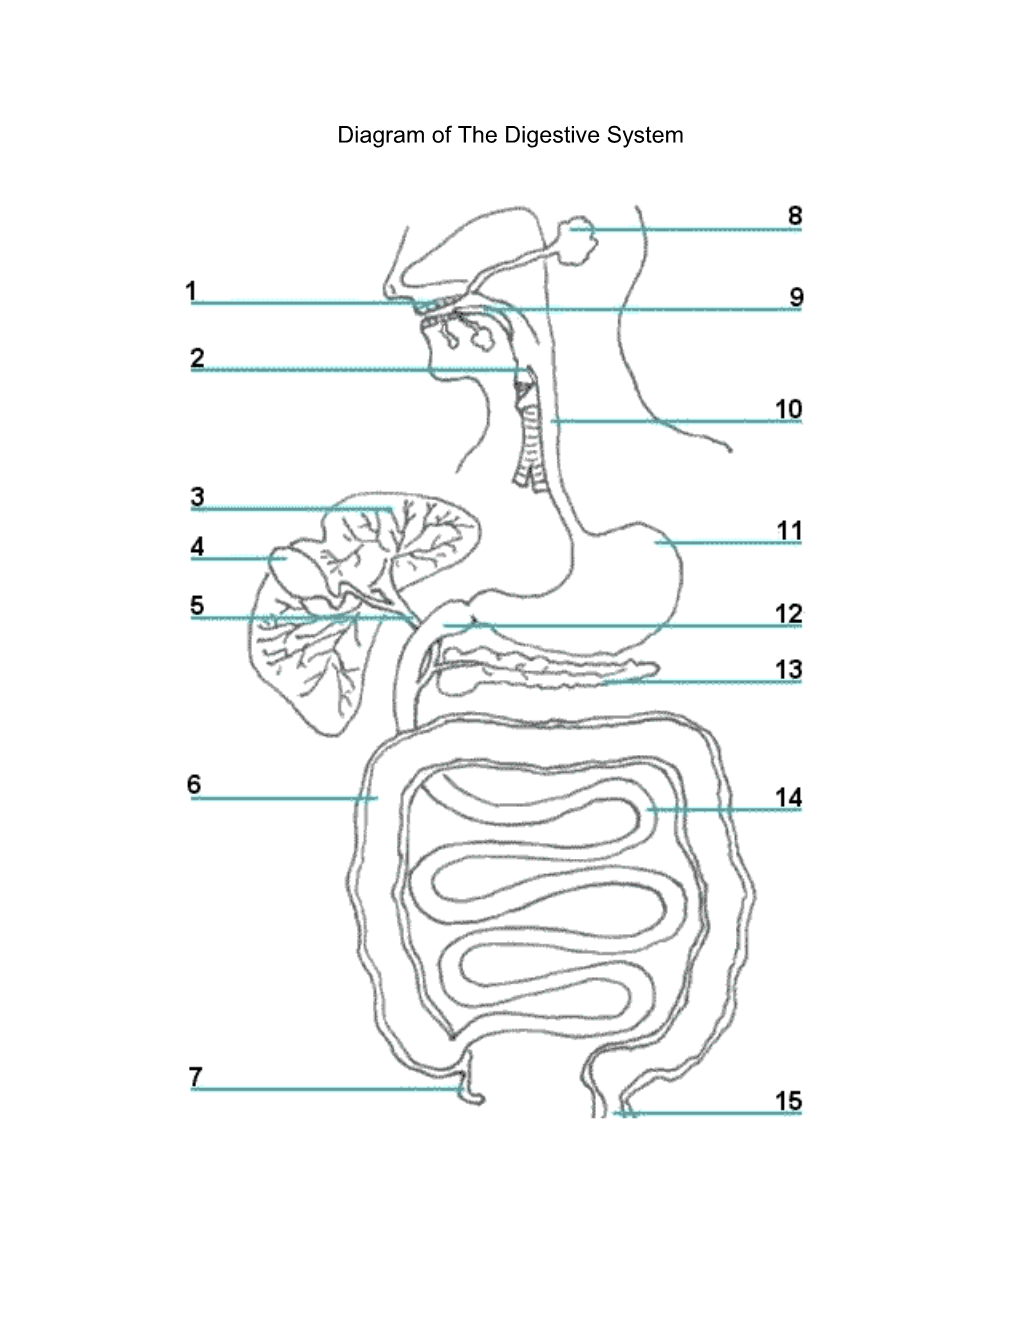 Diagram of the Digestive System